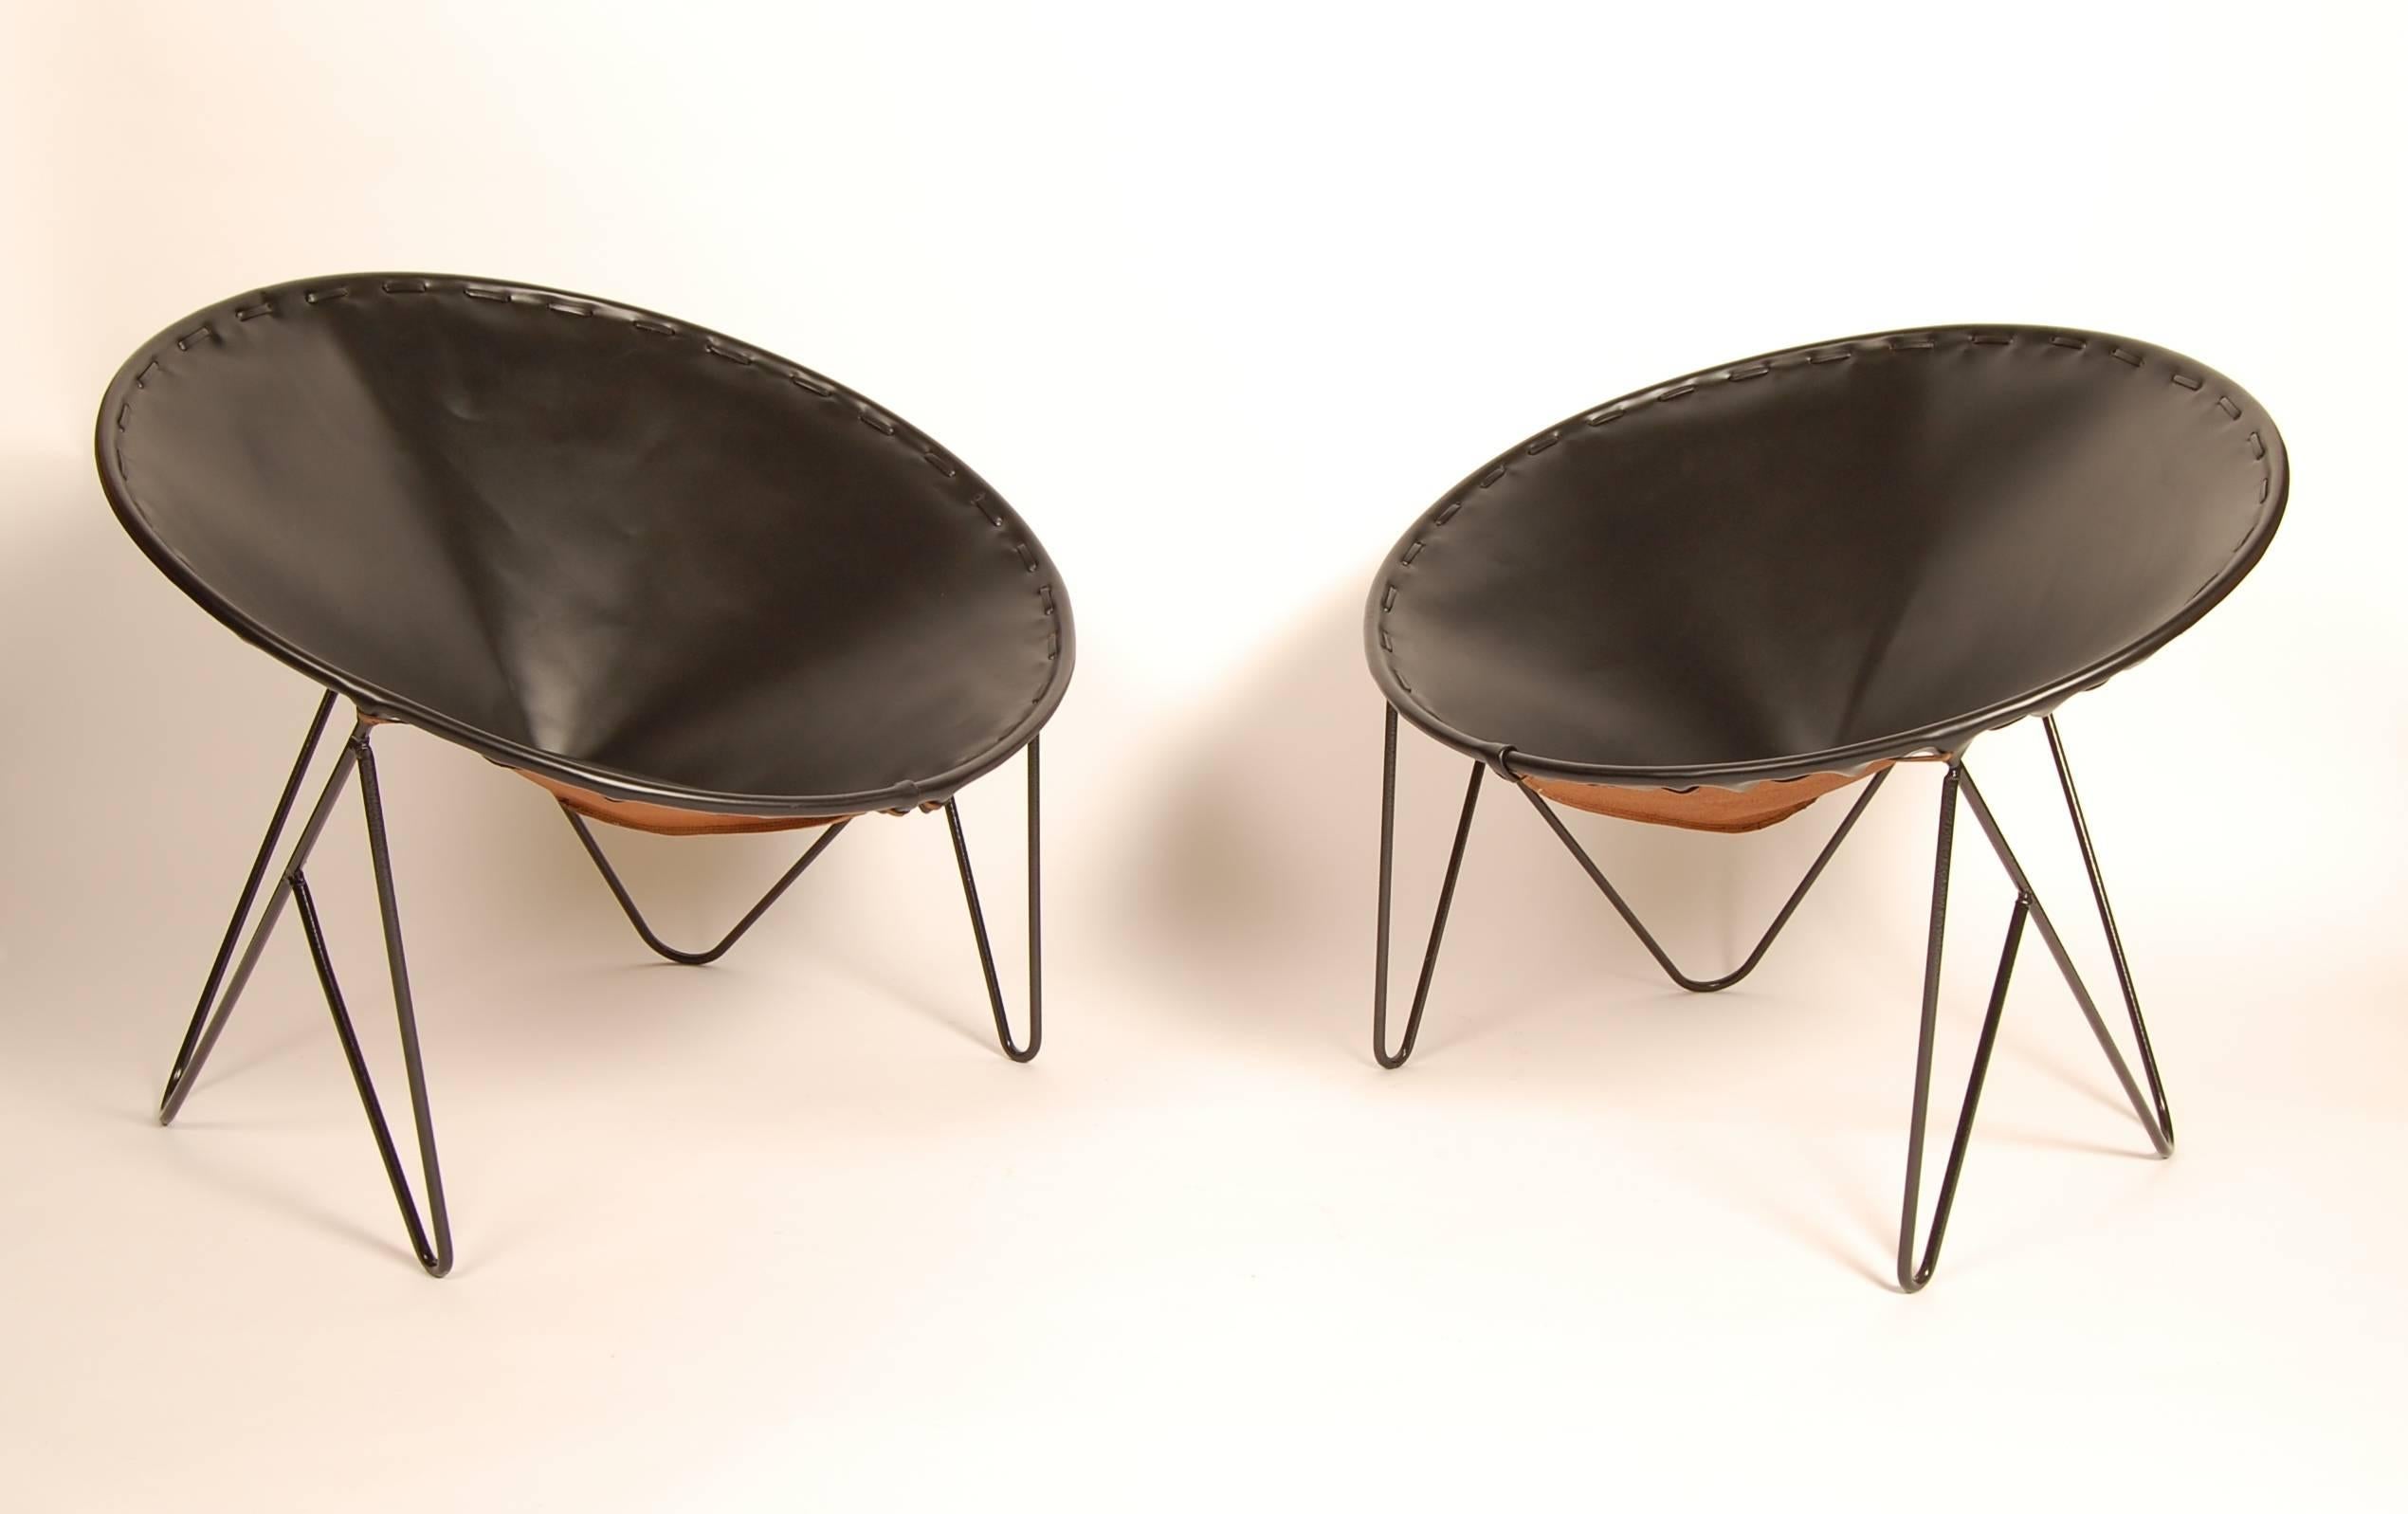 American 1950s California Iron Fortune Cookie Chairs